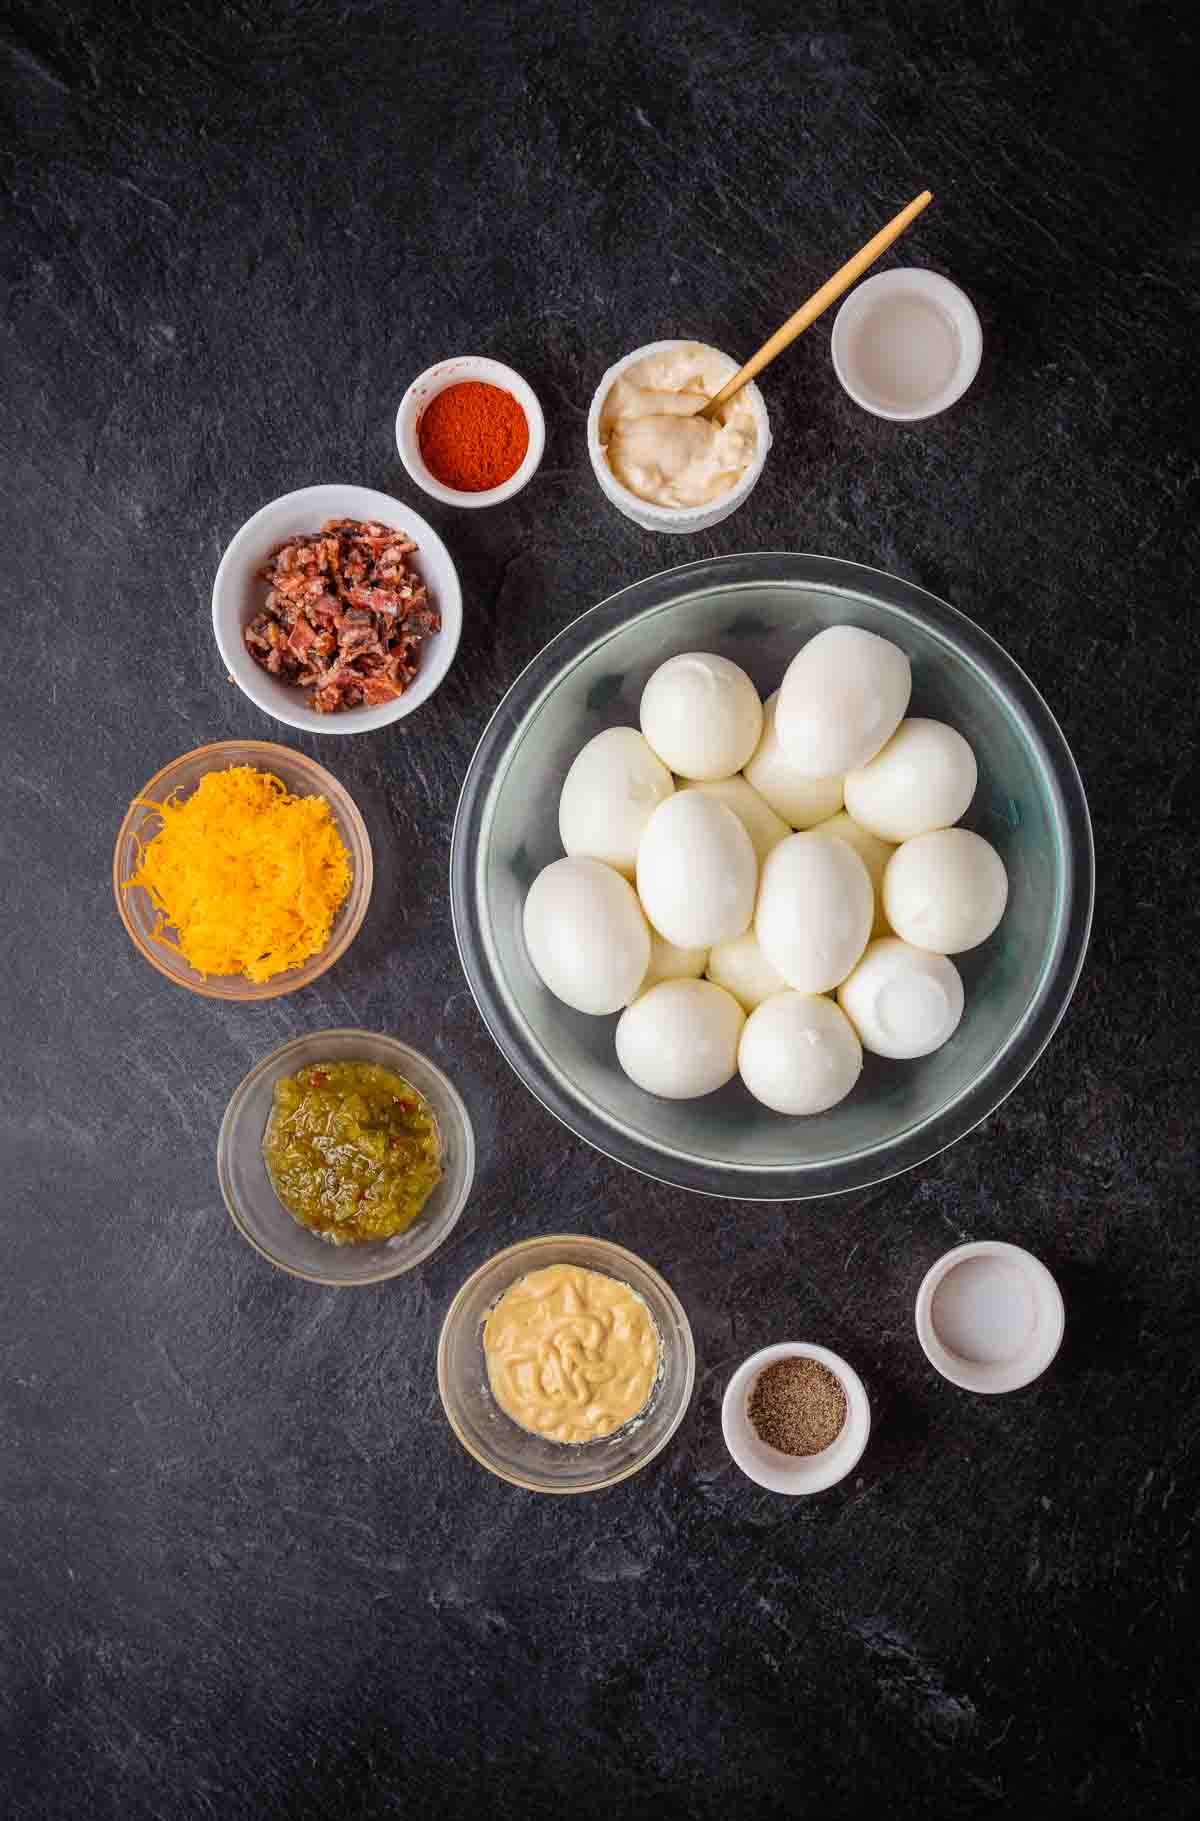 https://passthesushi.com/wp-content/uploads/2022/09/how-to-make-deviled-eggs-with-mayo-or-miracle-whip-.jpg